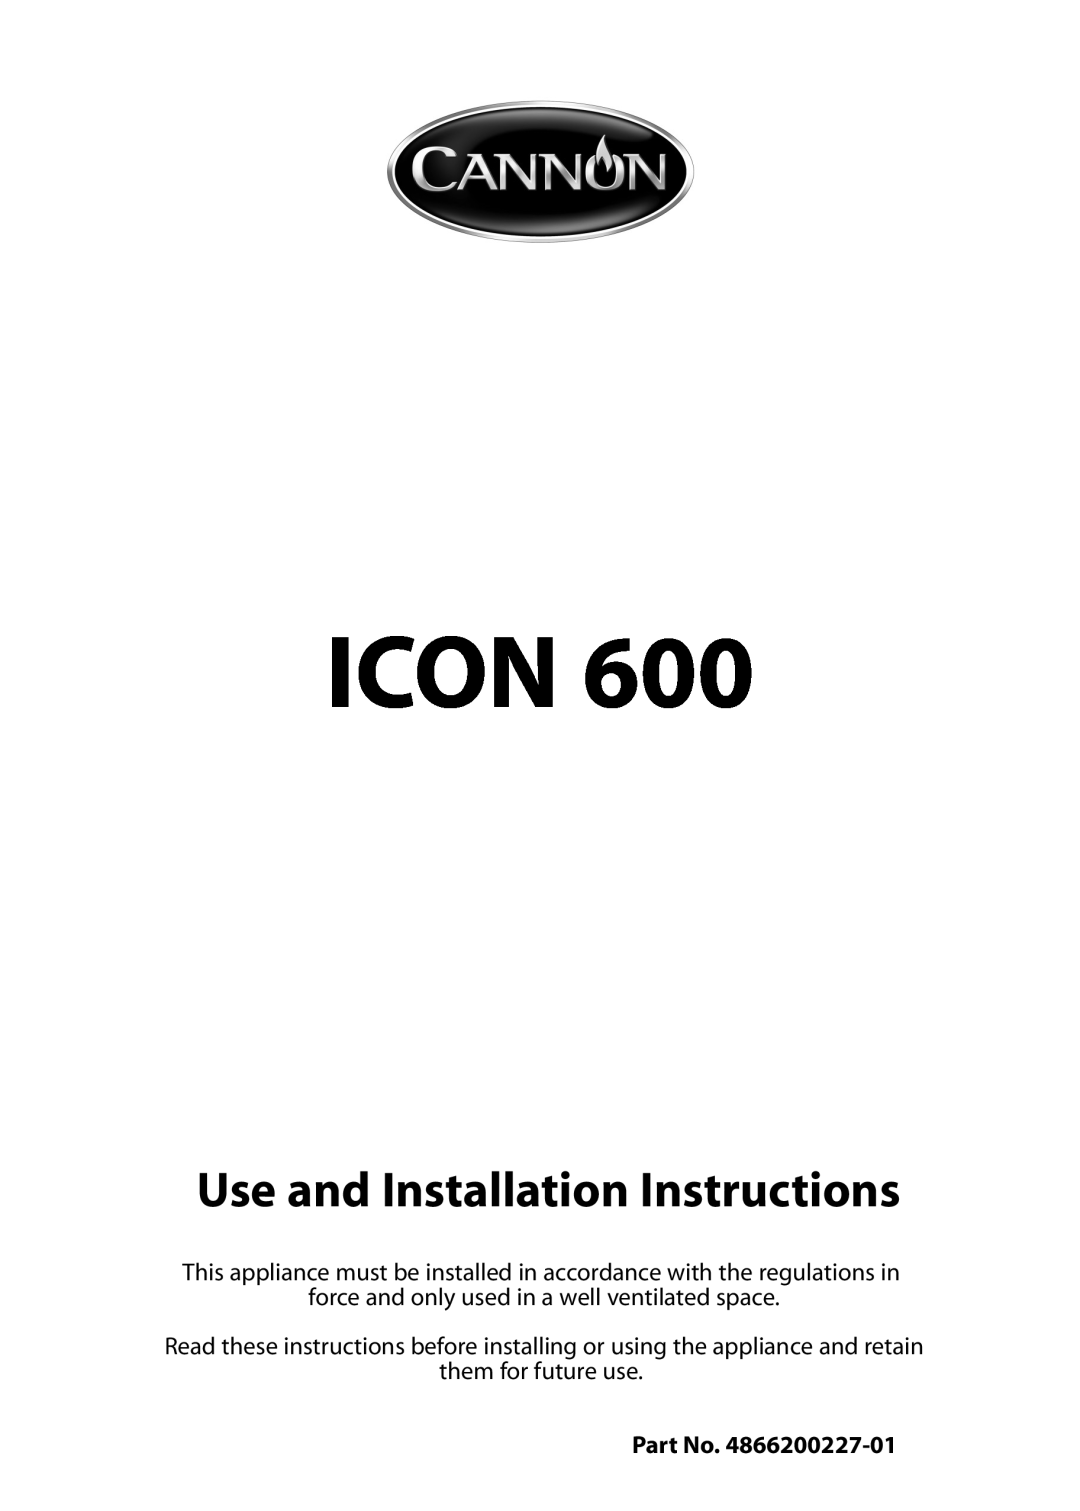 Cannon 10410G, ICON 600 installation instructions Icon, Use and Installation Instructions 